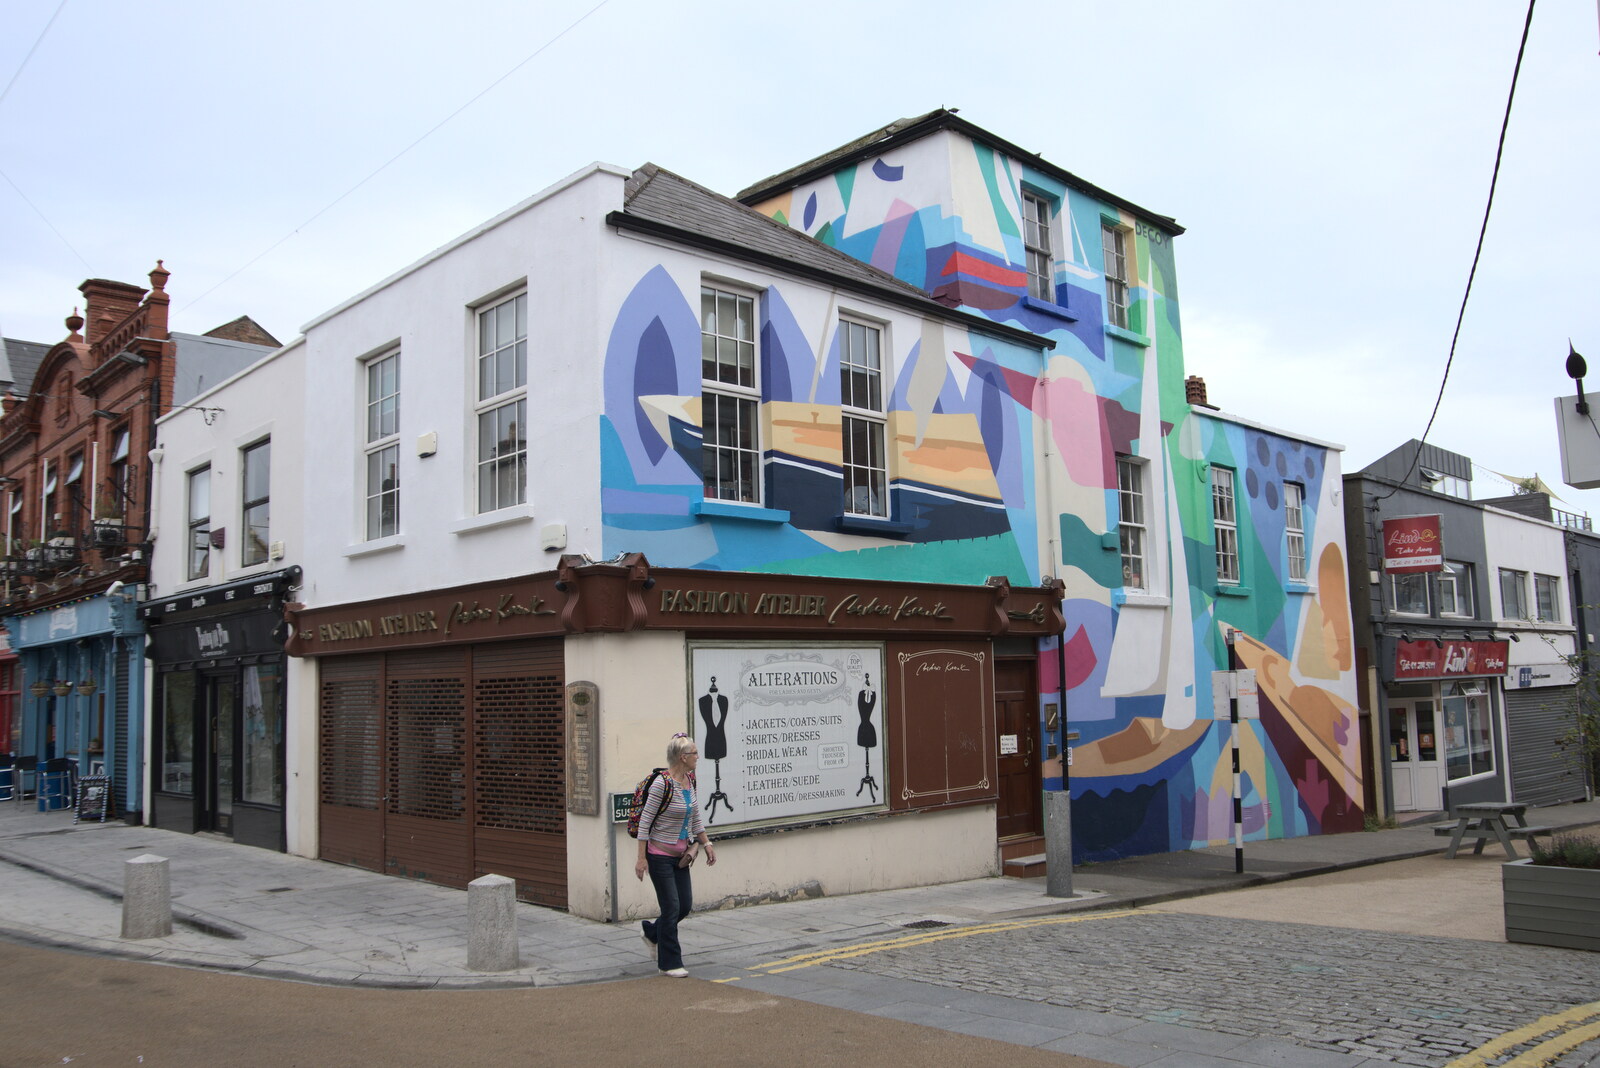 Another painted building from Manorhamilton and the Street Art of Dún Laoghaire, Ireland - 15th August 2021